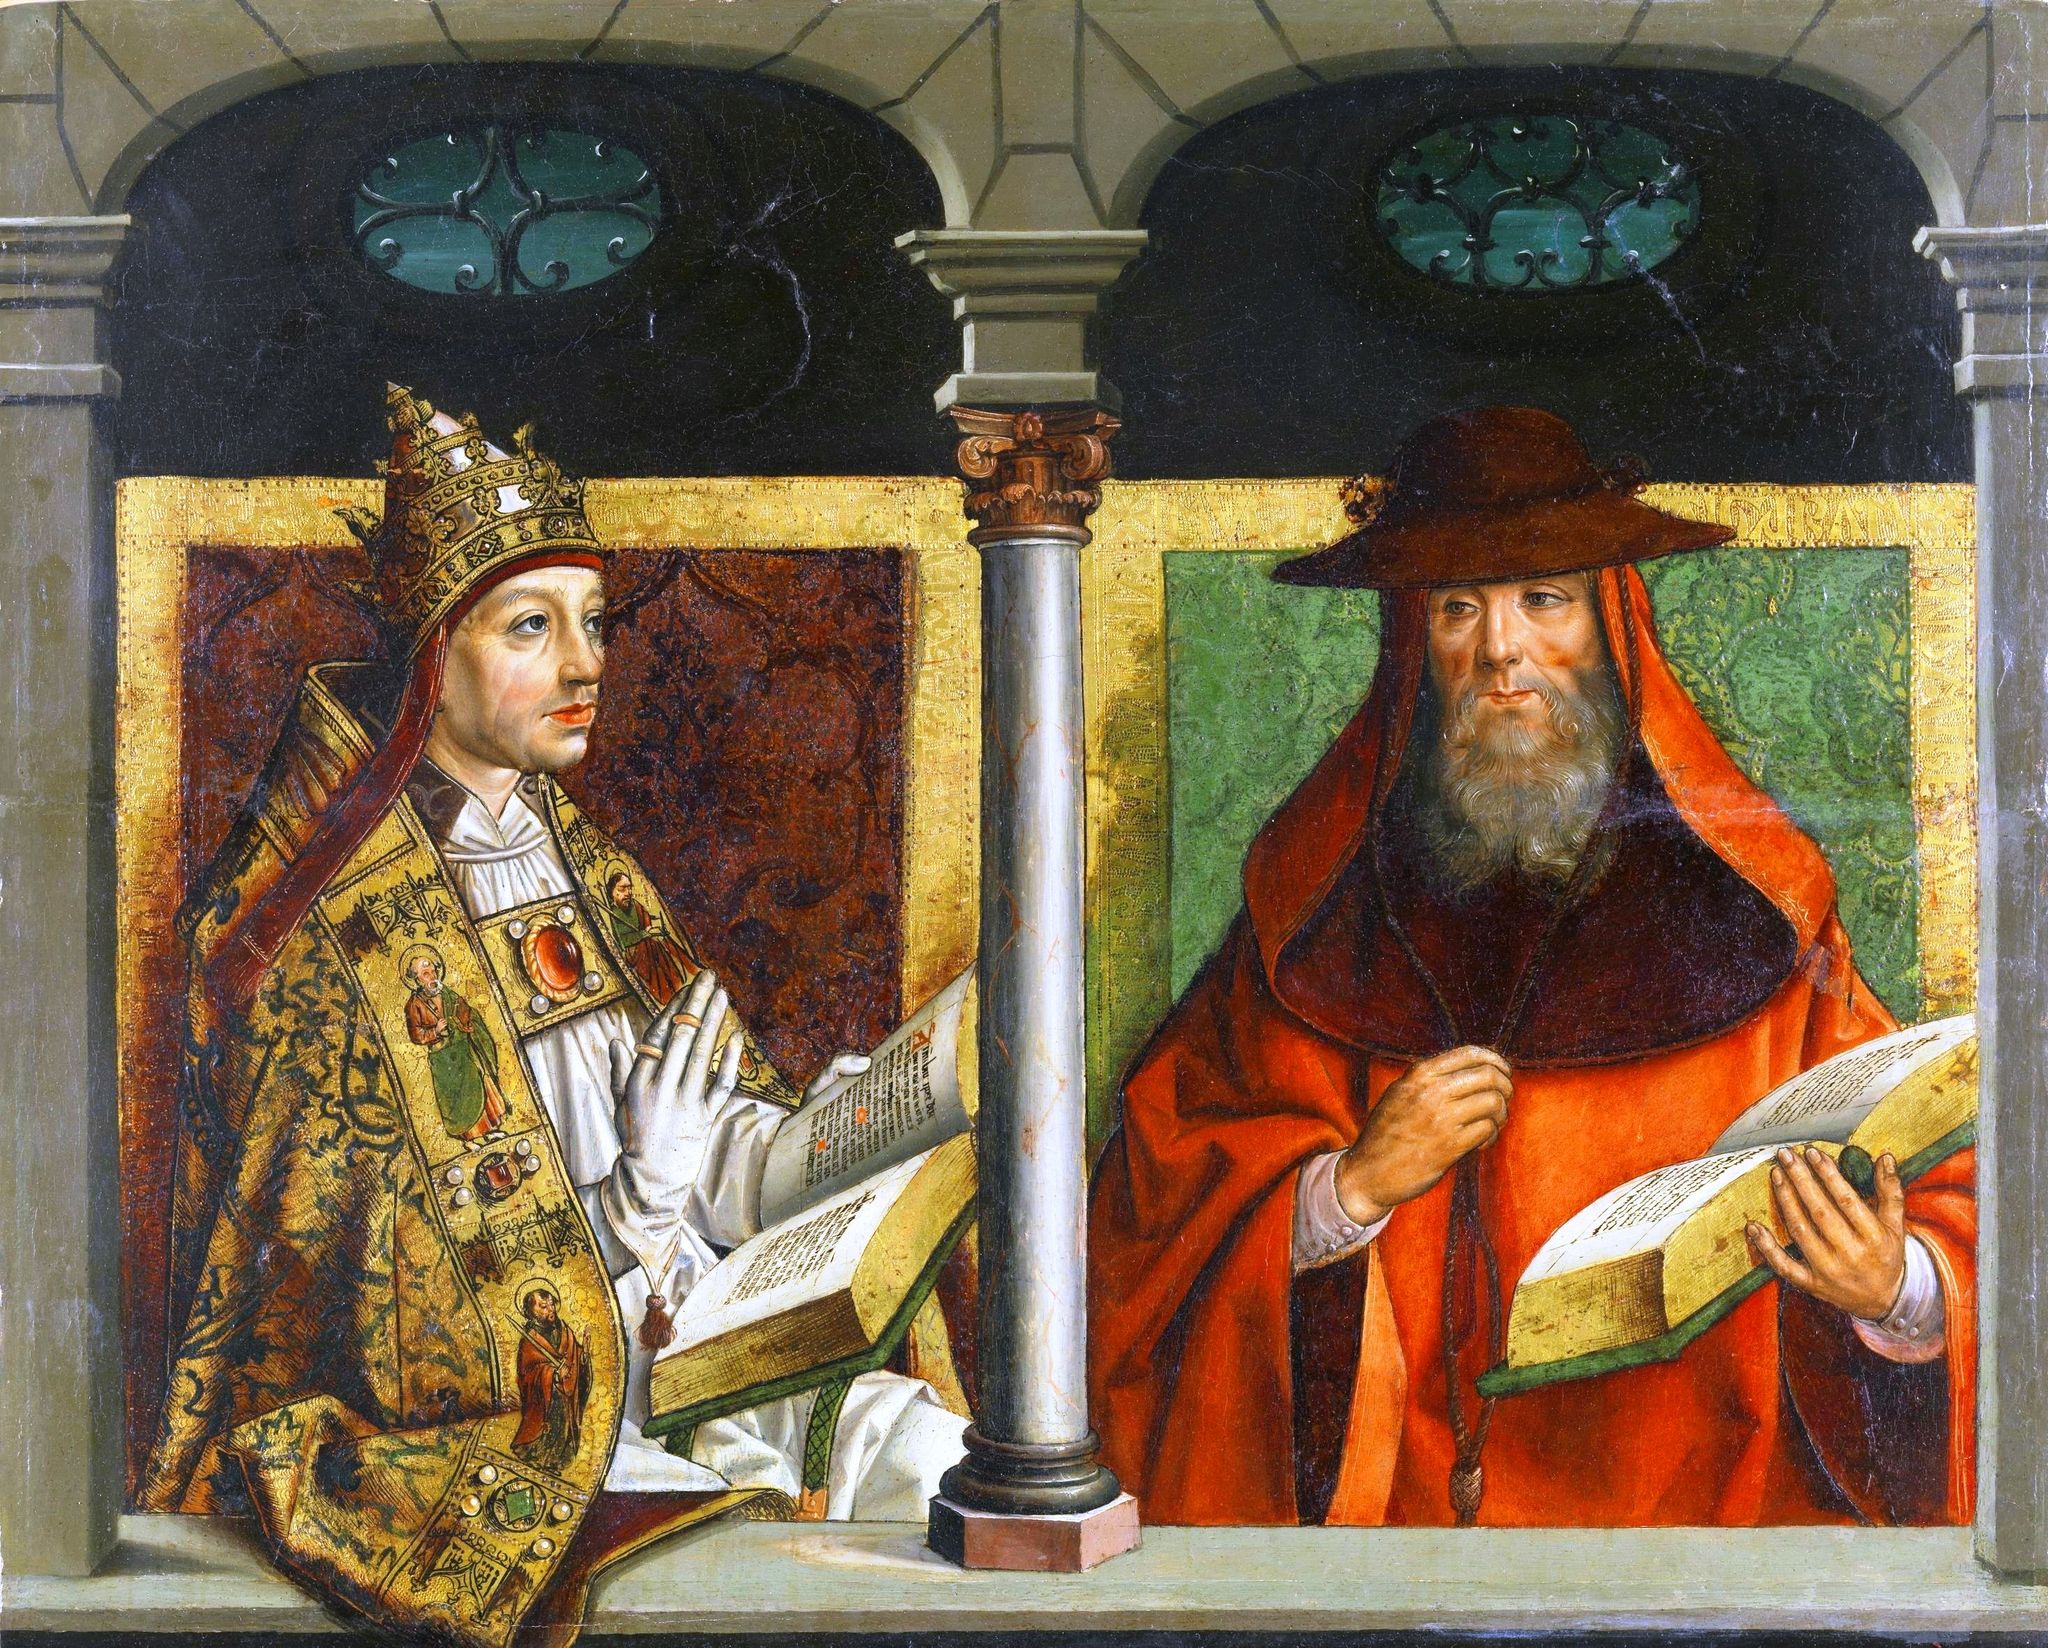 Saint Gregory the Great and Saint Jerome